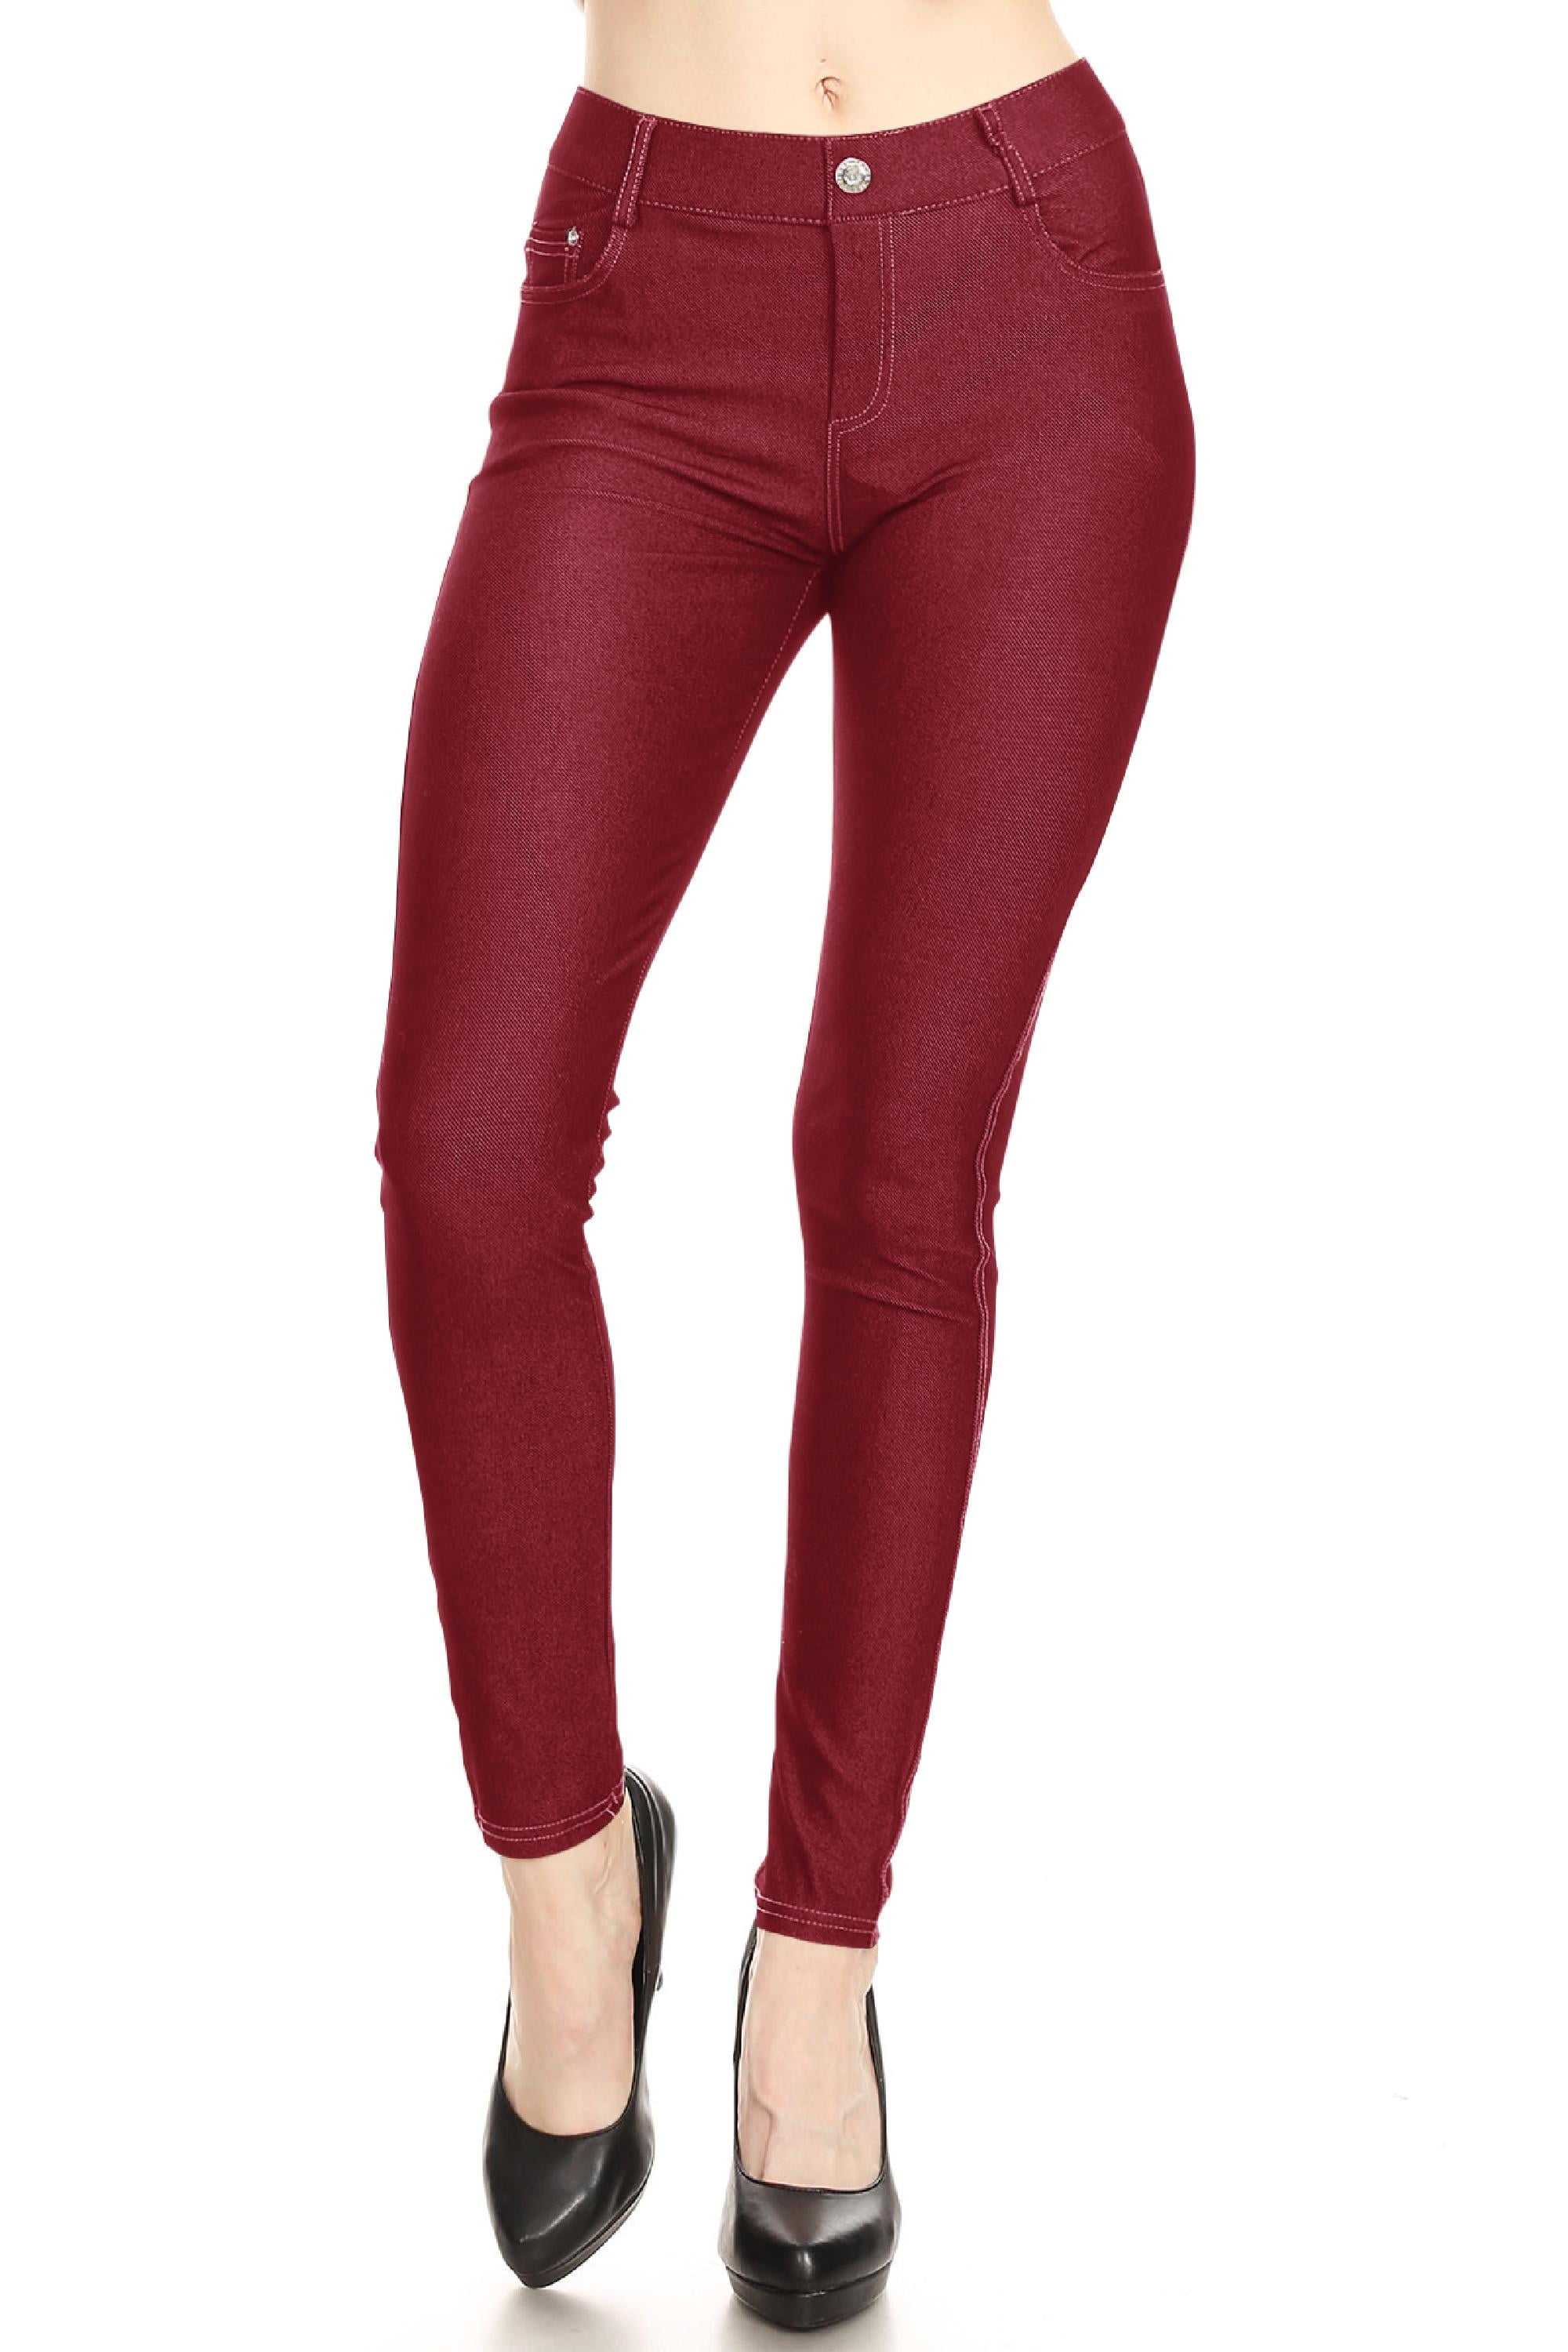 Womens Fashion Fitted Jeggings - RED- Medium-Large 